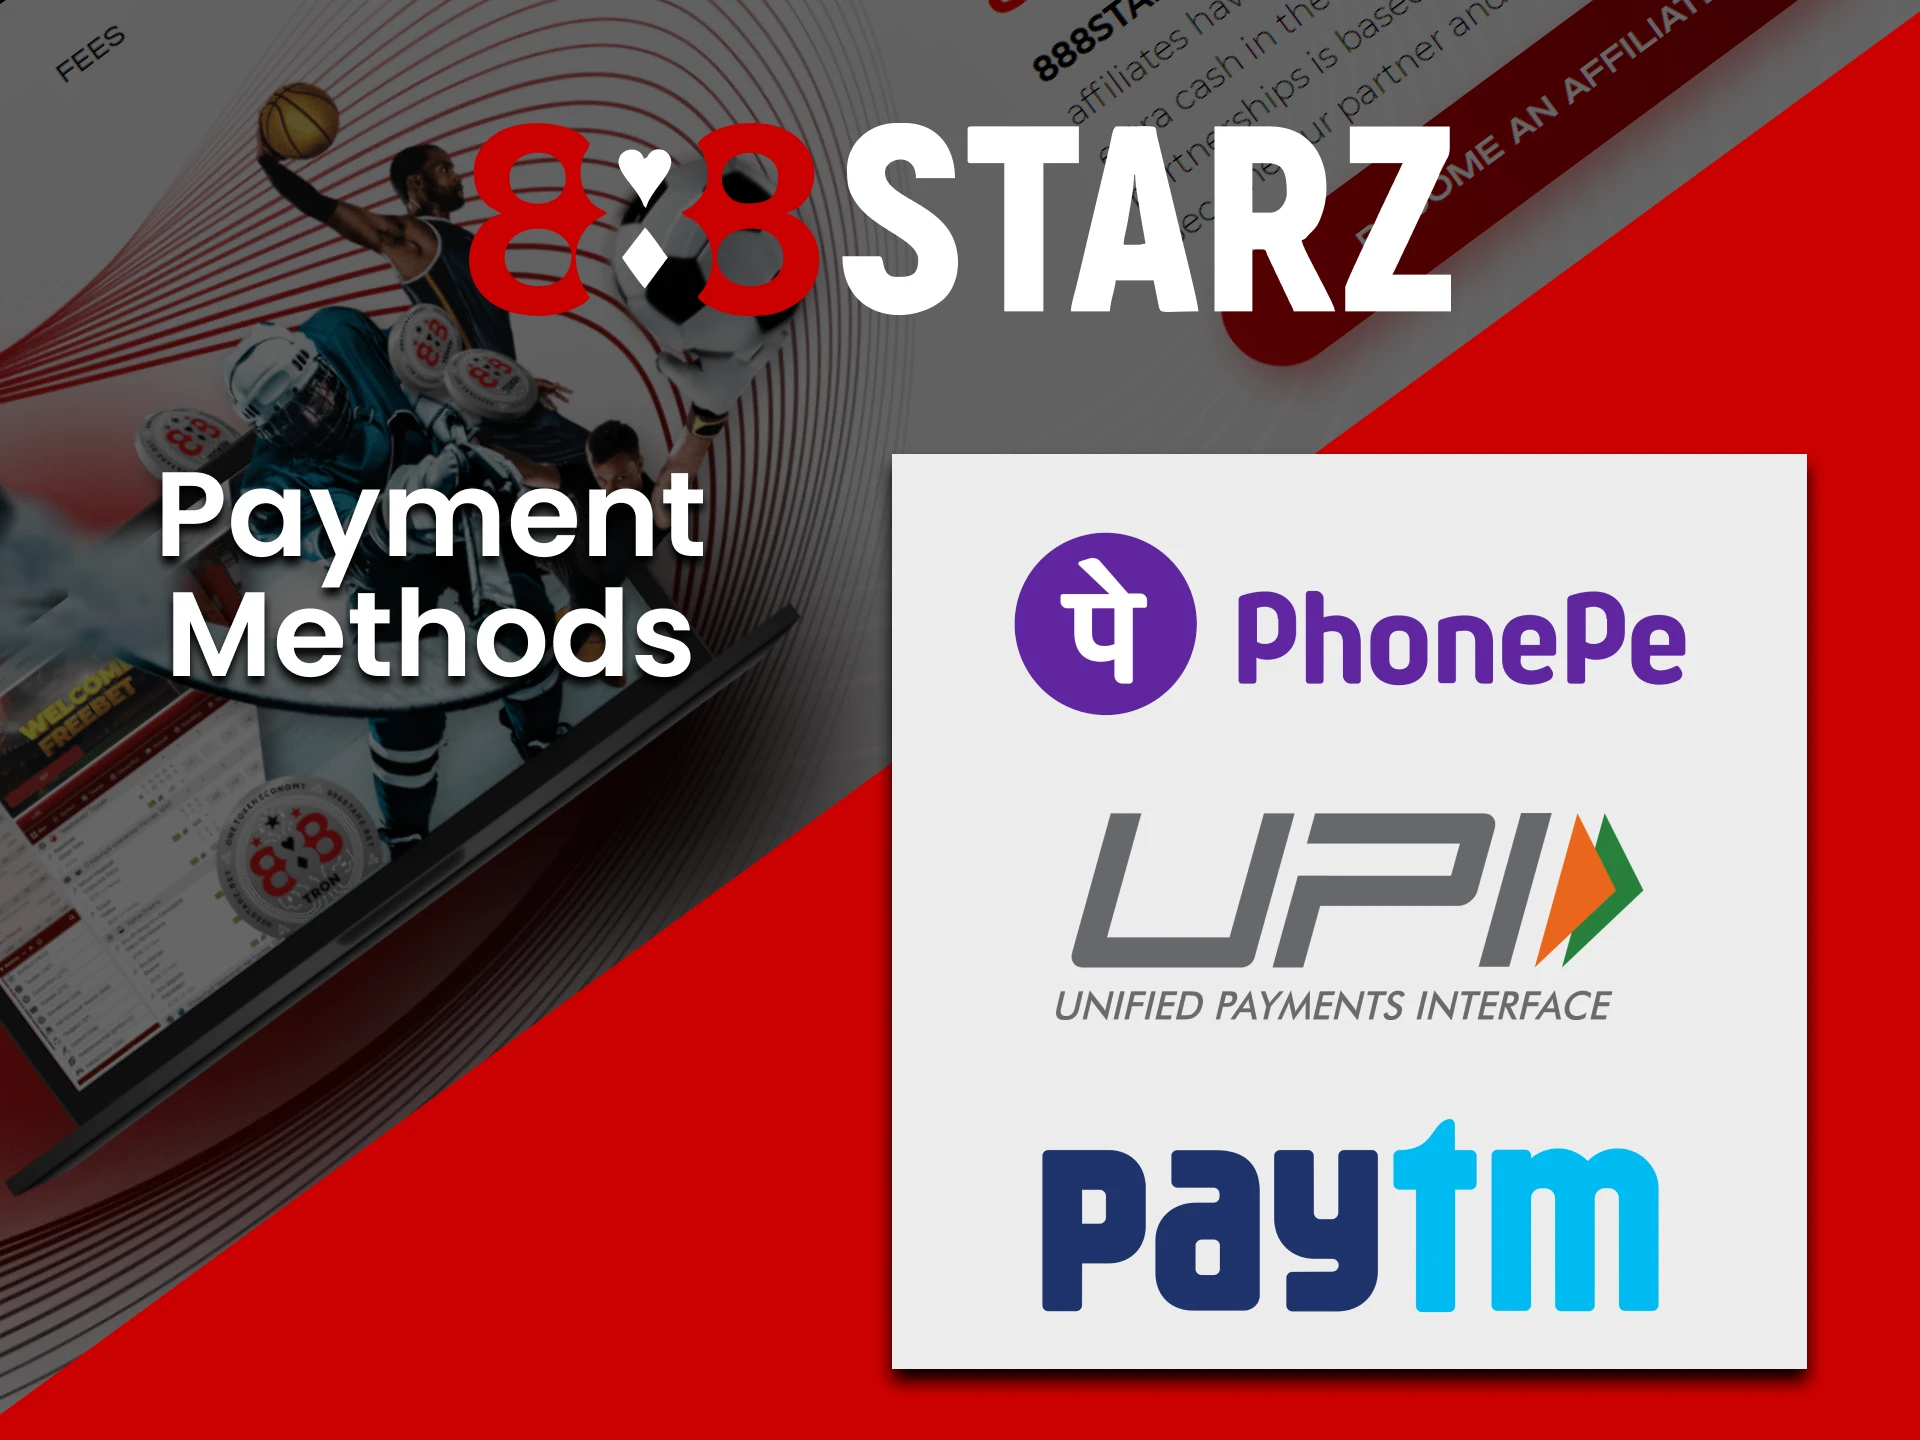 Choose prefered payment methods at 888starz.